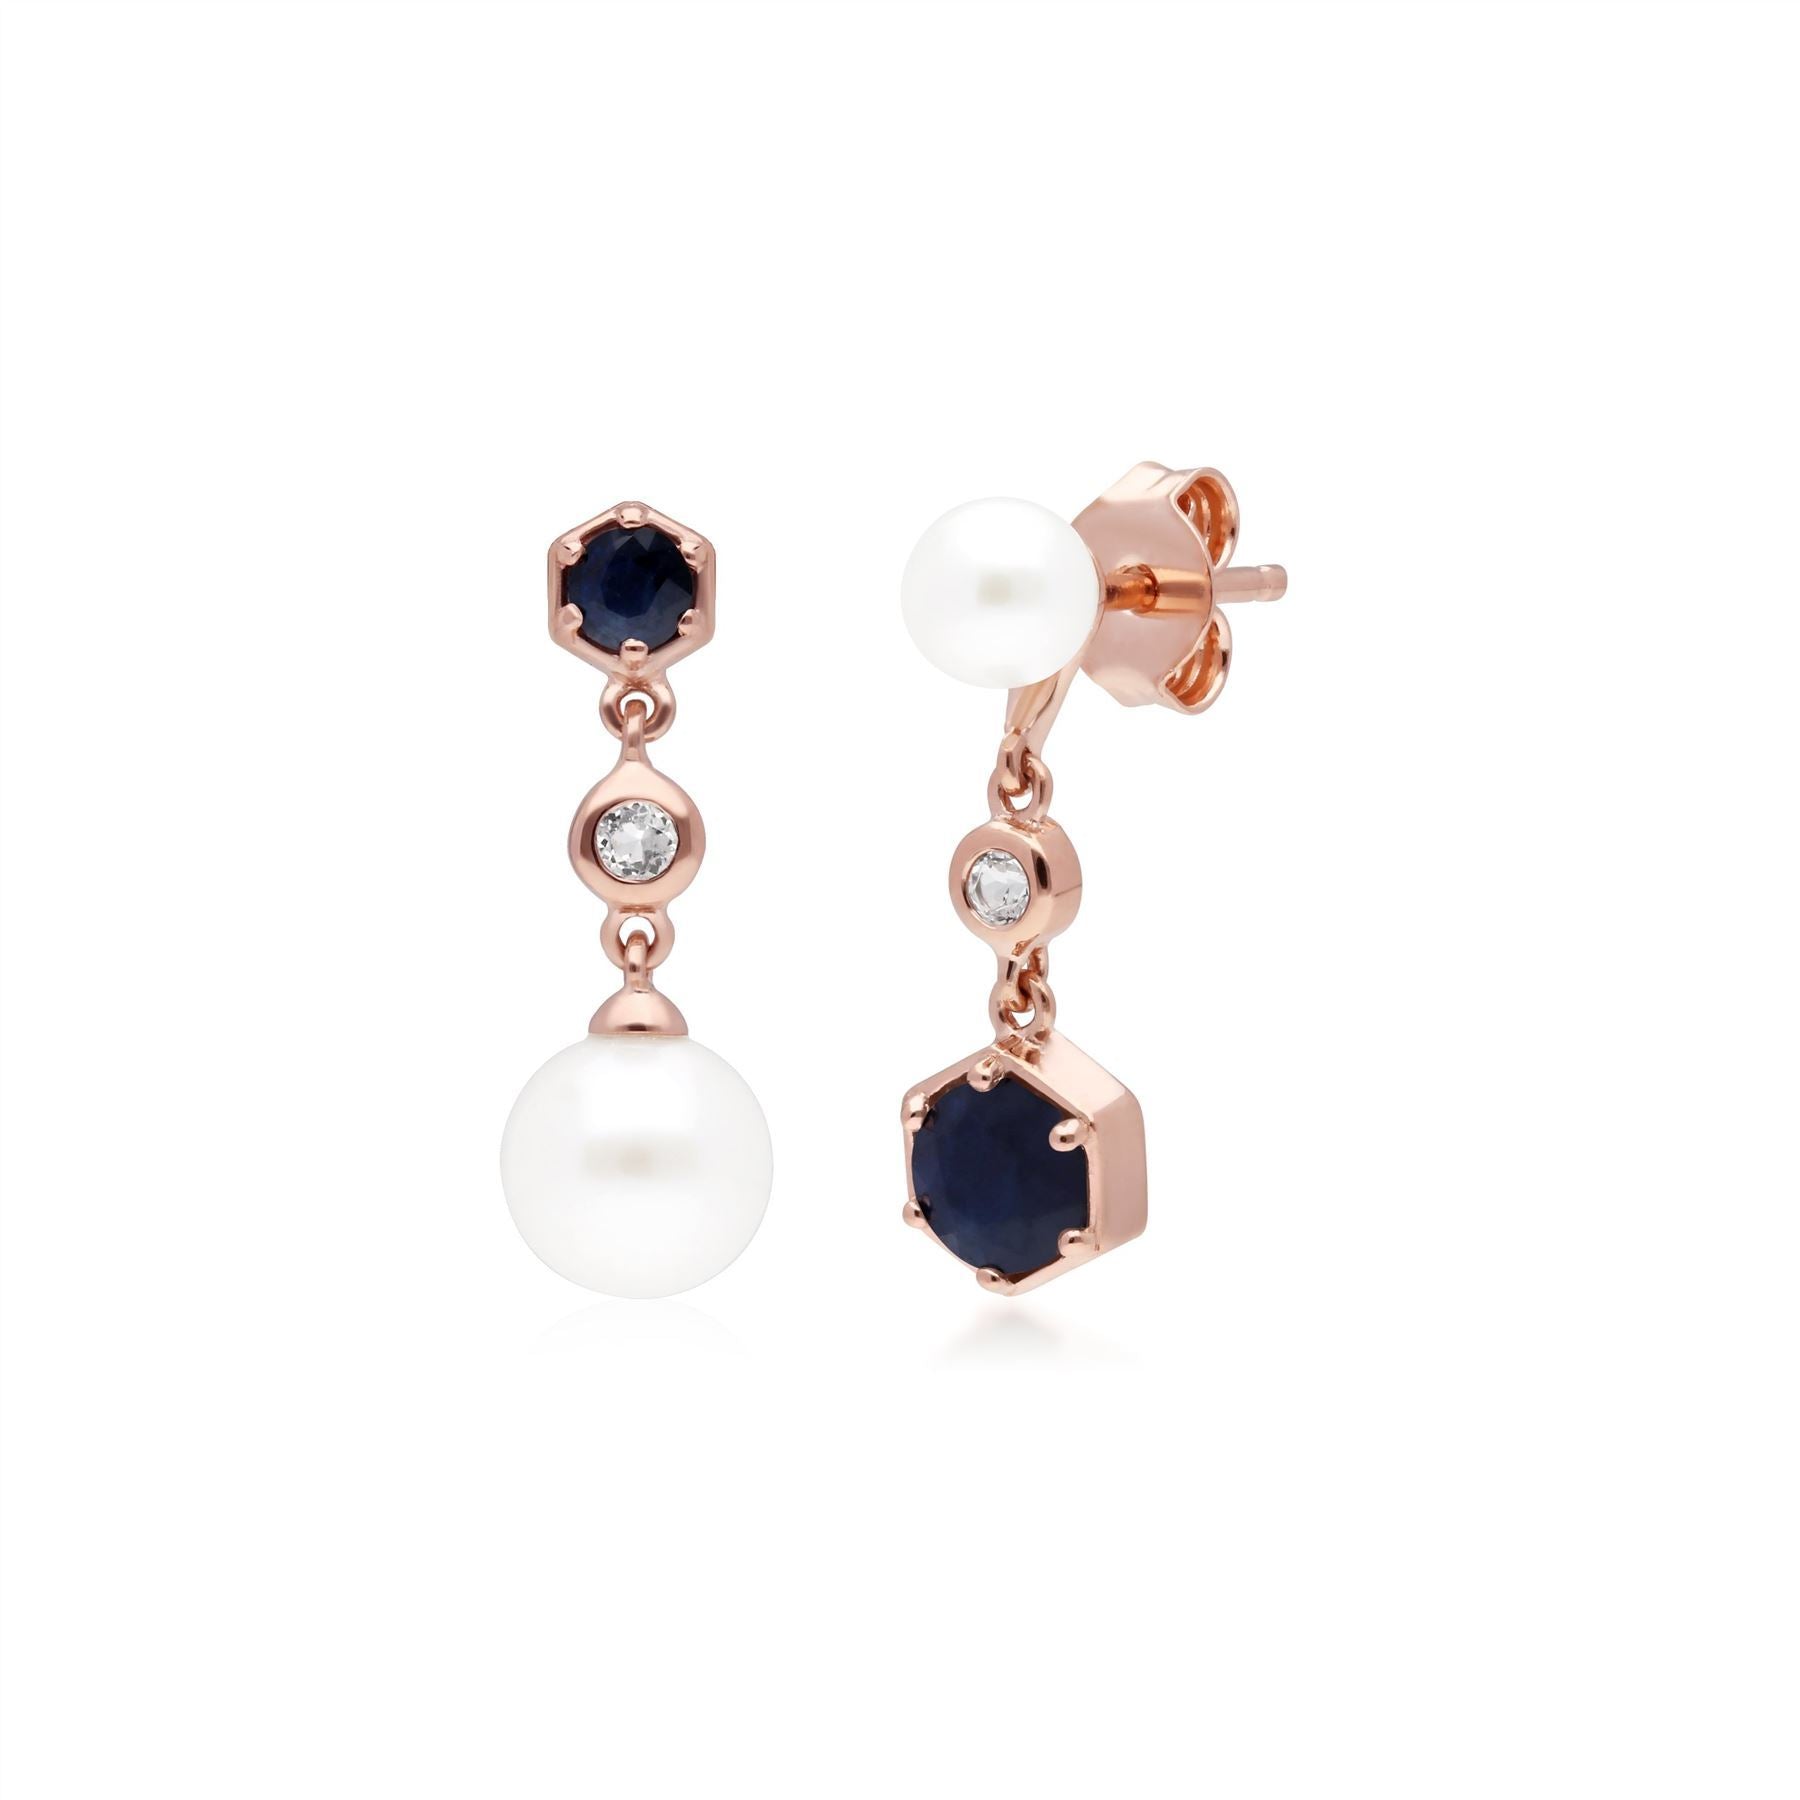 Modern Pearl, Sapphire & Topaz Mismatched Drop Earrings in Rose Gold Plated 925 Sterling Silver